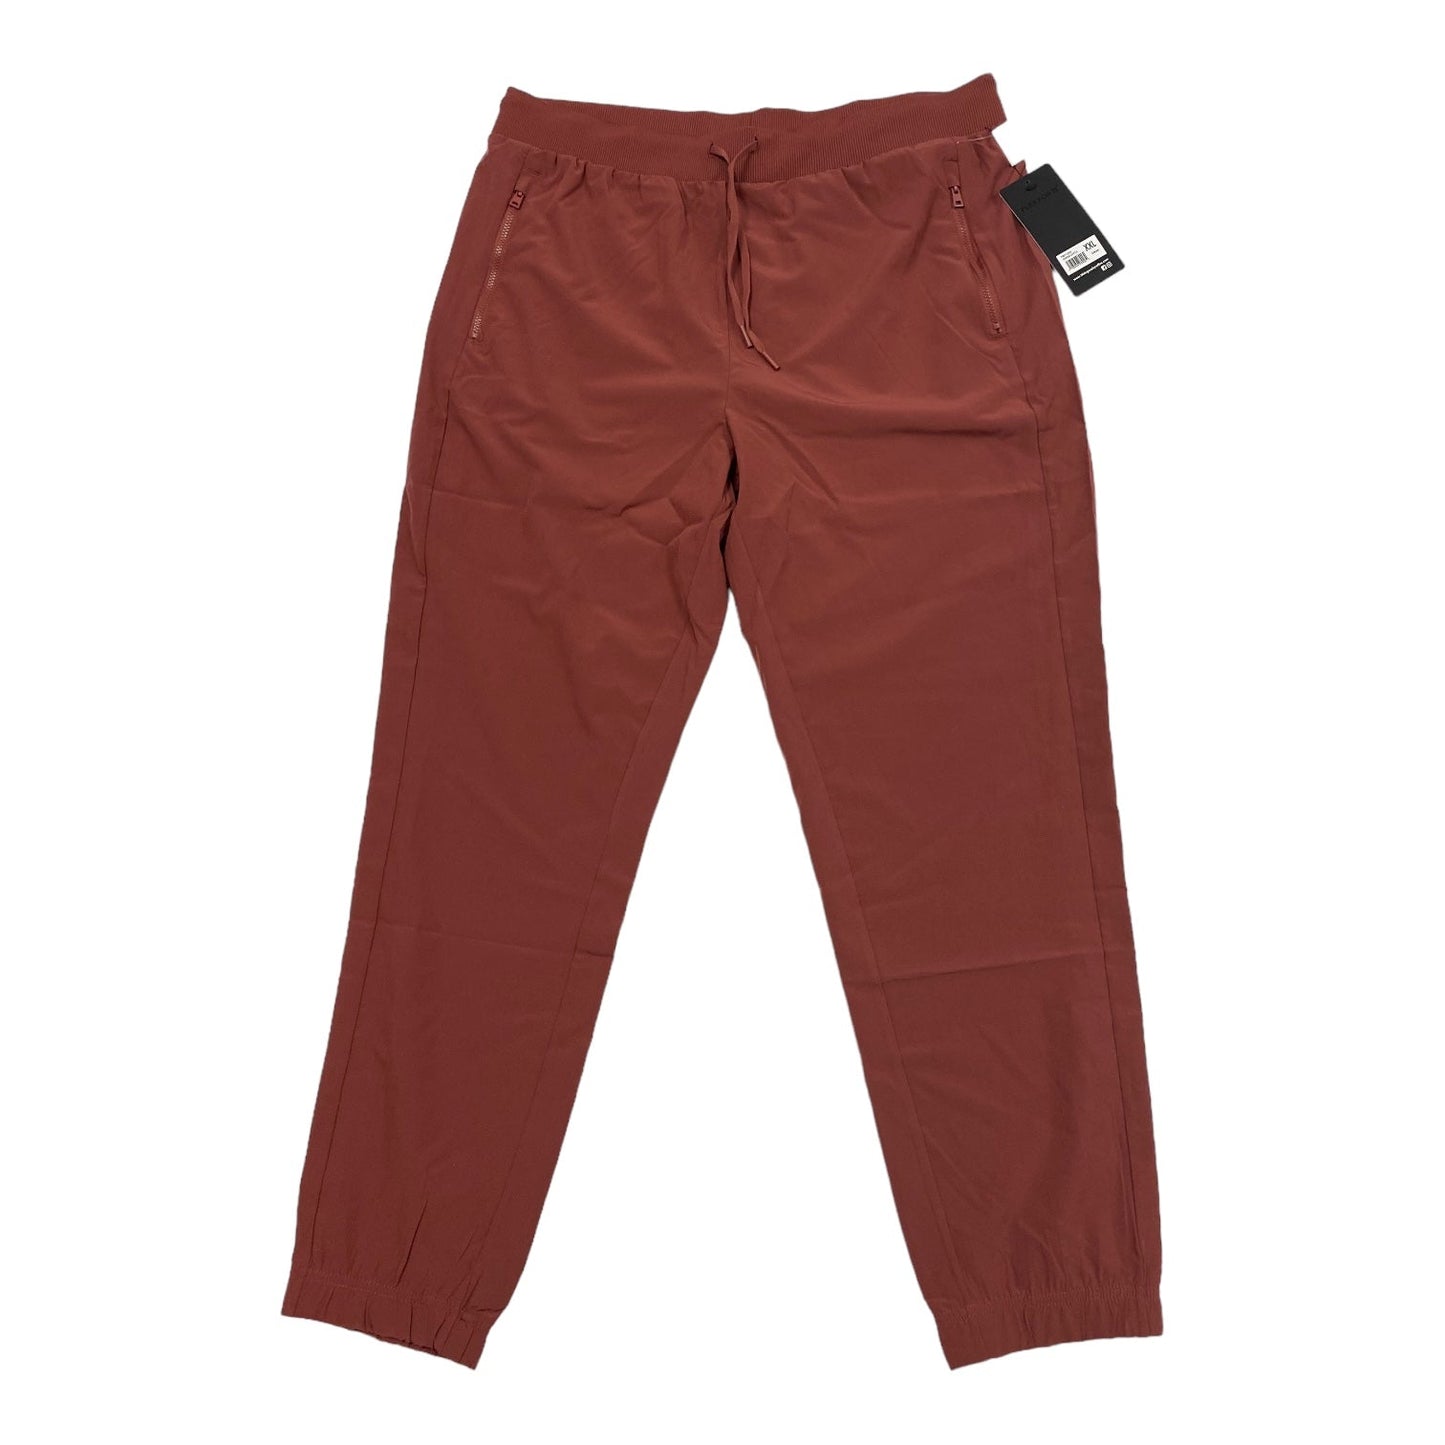 Red Athletic Pants 90 Degrees By Reflex, Size Xxl